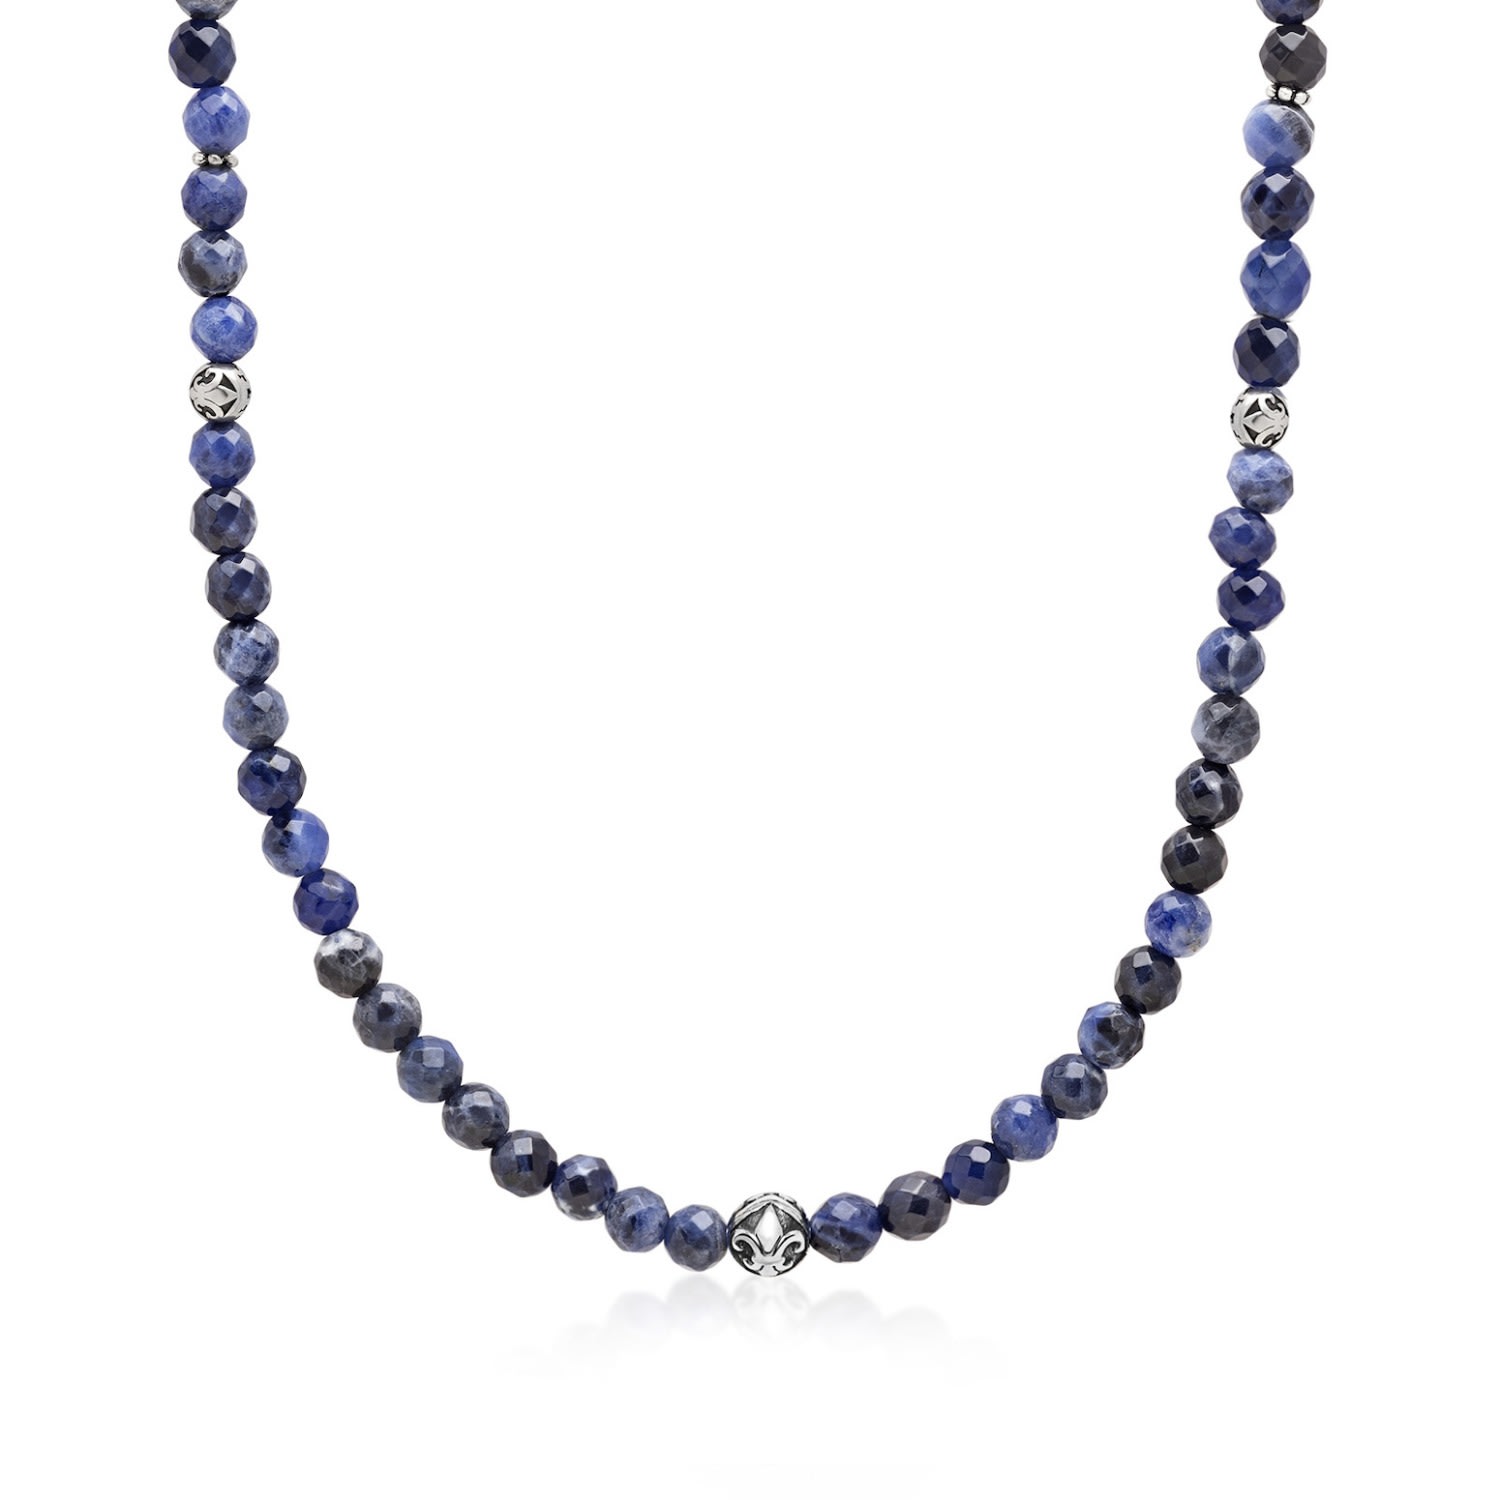 Men's Blue / Silver Beaded Necklace With Faceted Dumortierite And Silver Nialaya